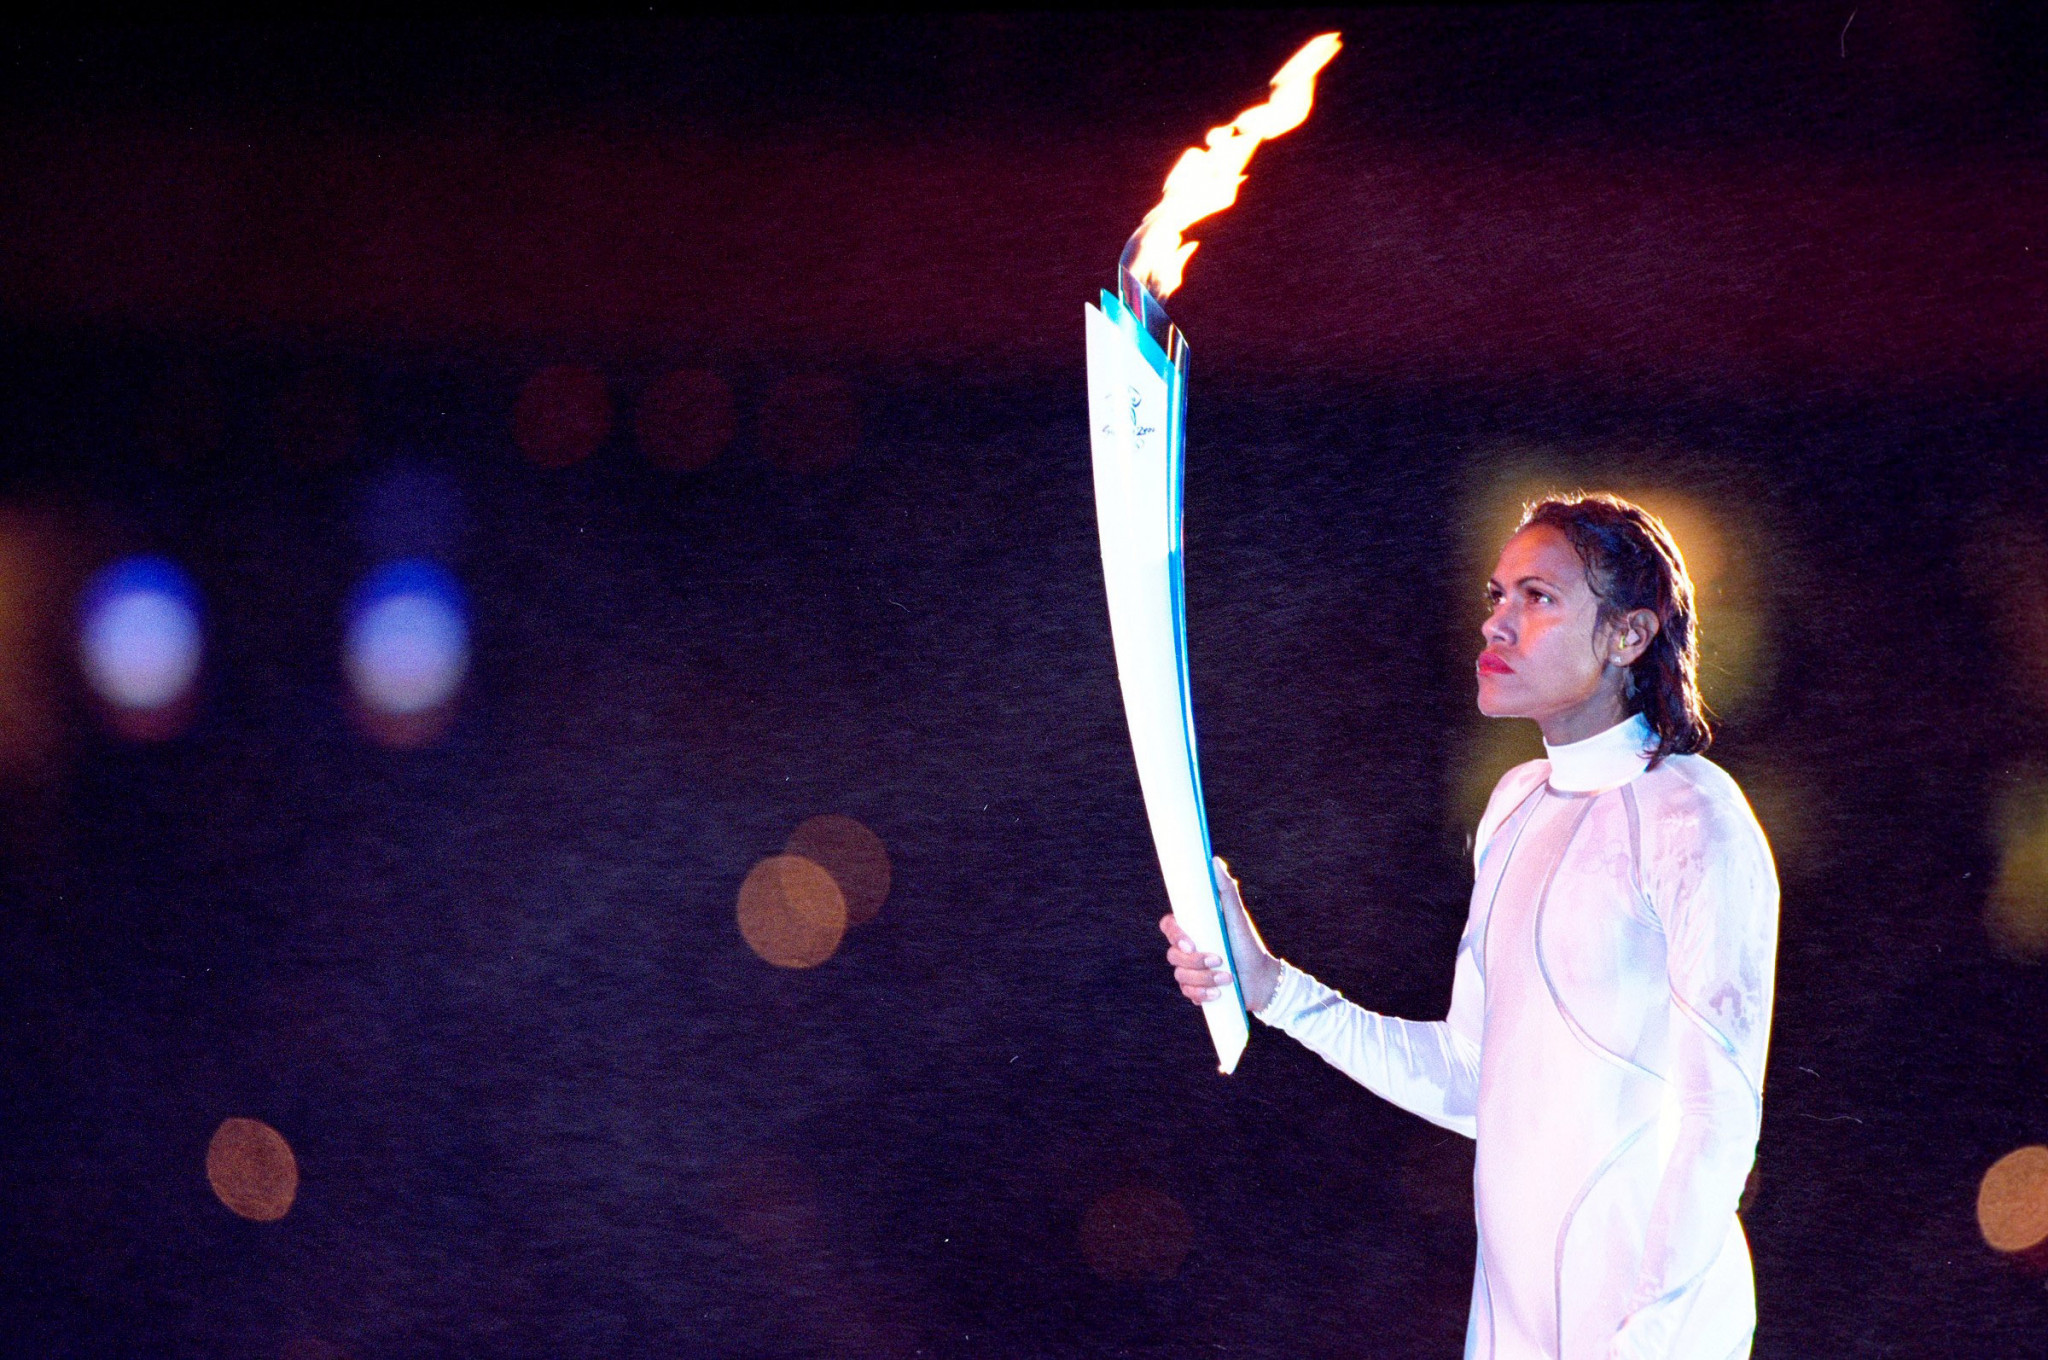 Sydney 2000 women's 400m champion Cathy Freeman is also a supporter of the campaign ©Getty Images